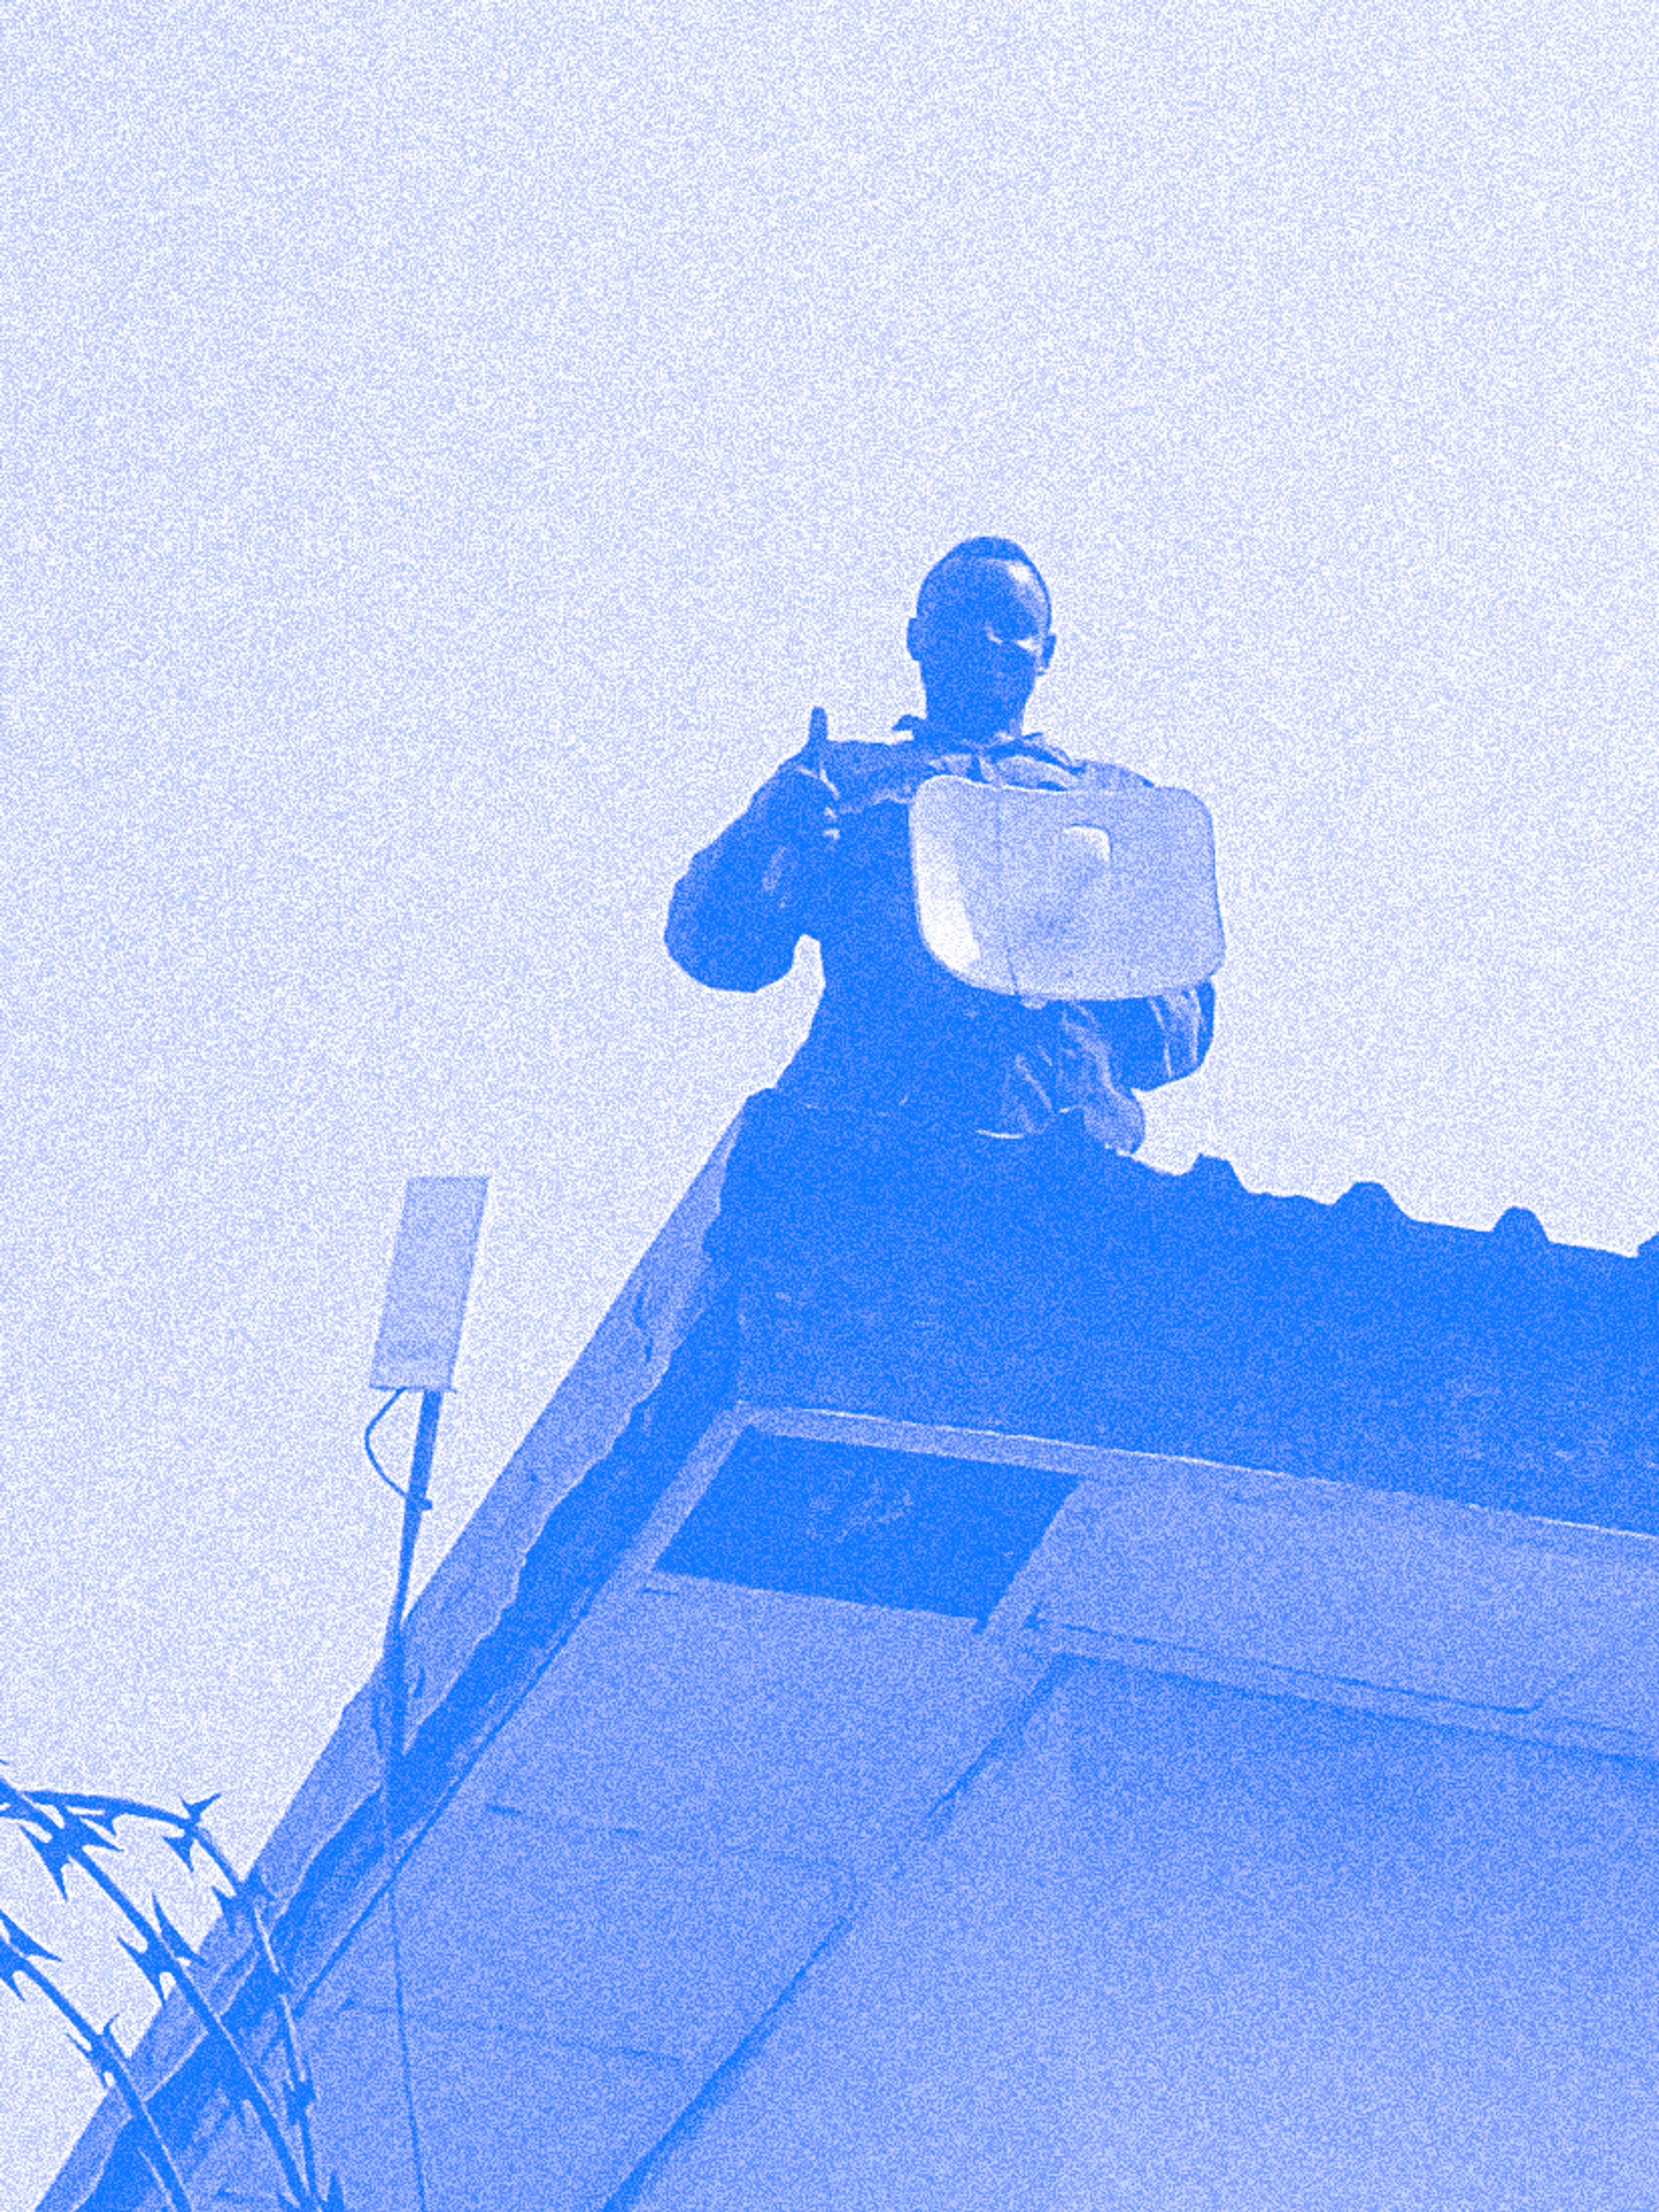 A person holding an Althea network antenna on a roof in Abuja, Nigeria.